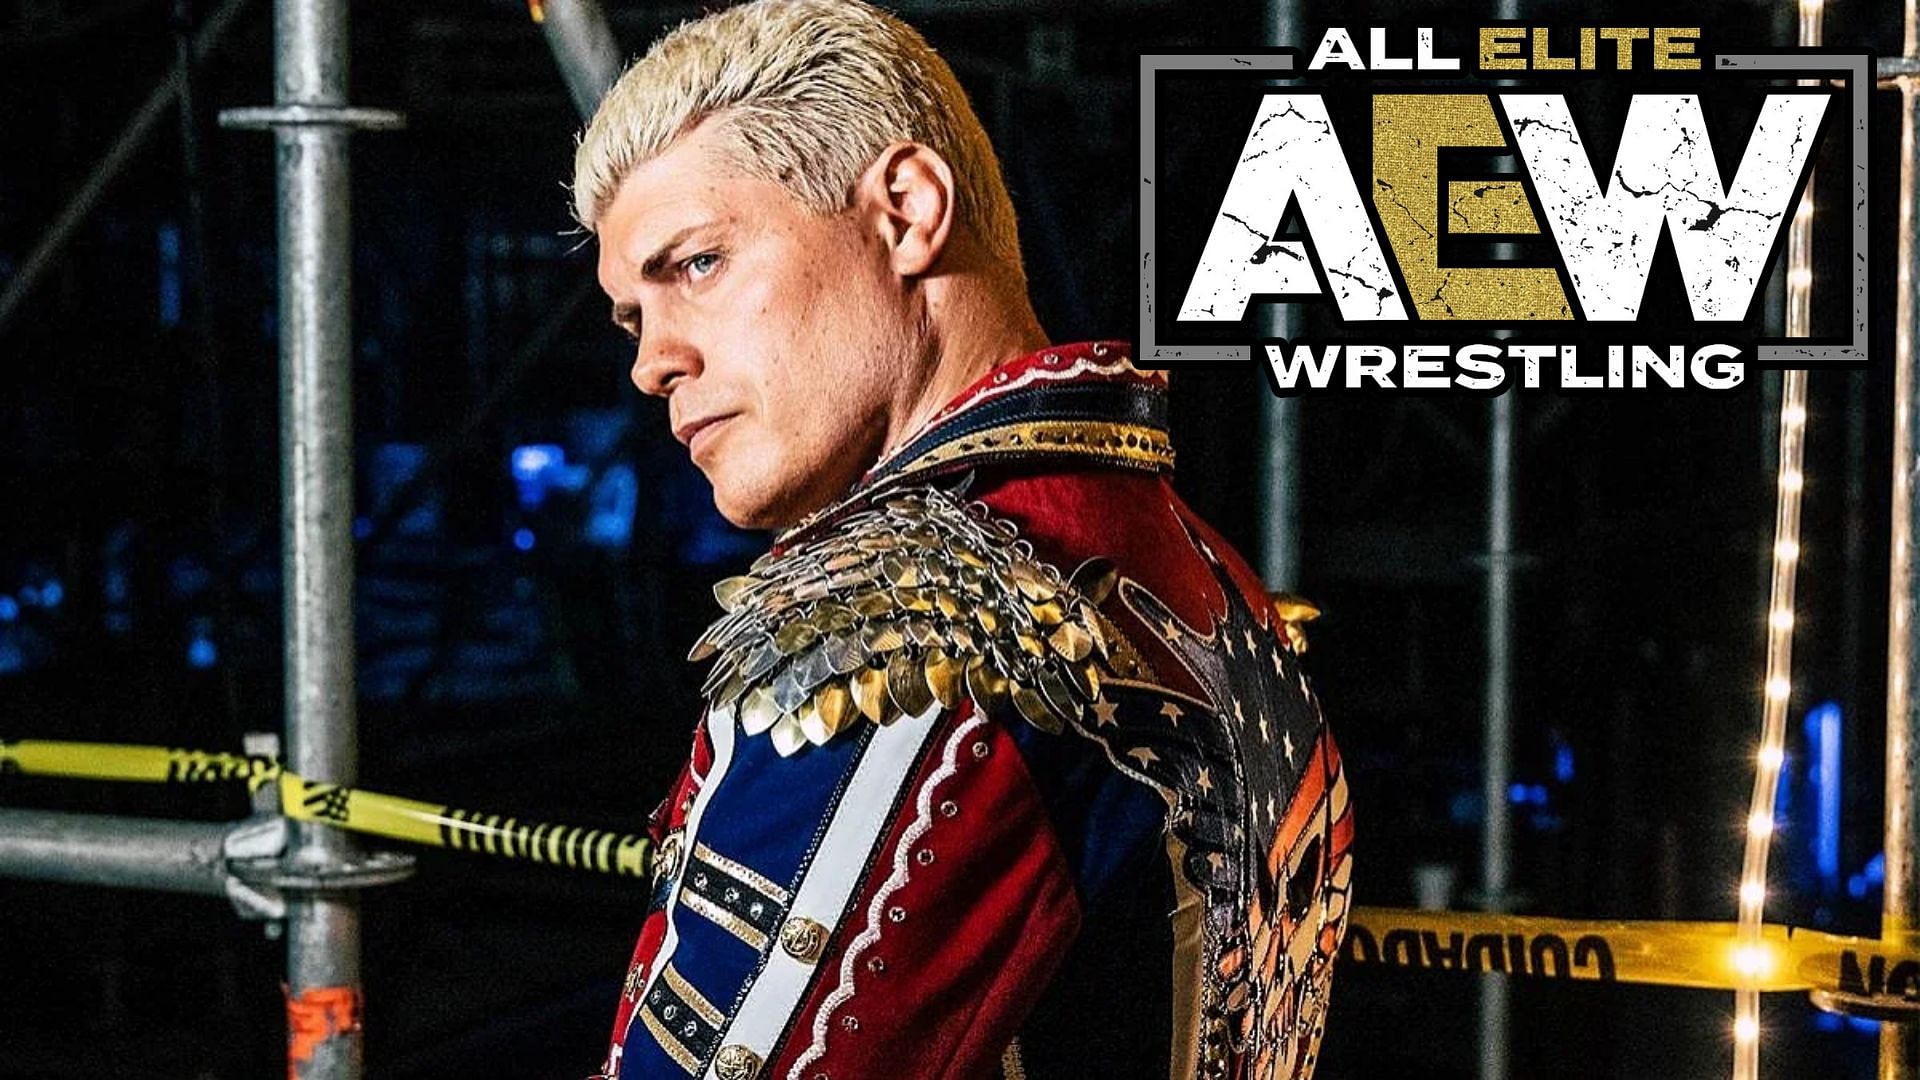 Could Cody Rhodes end up winning this year